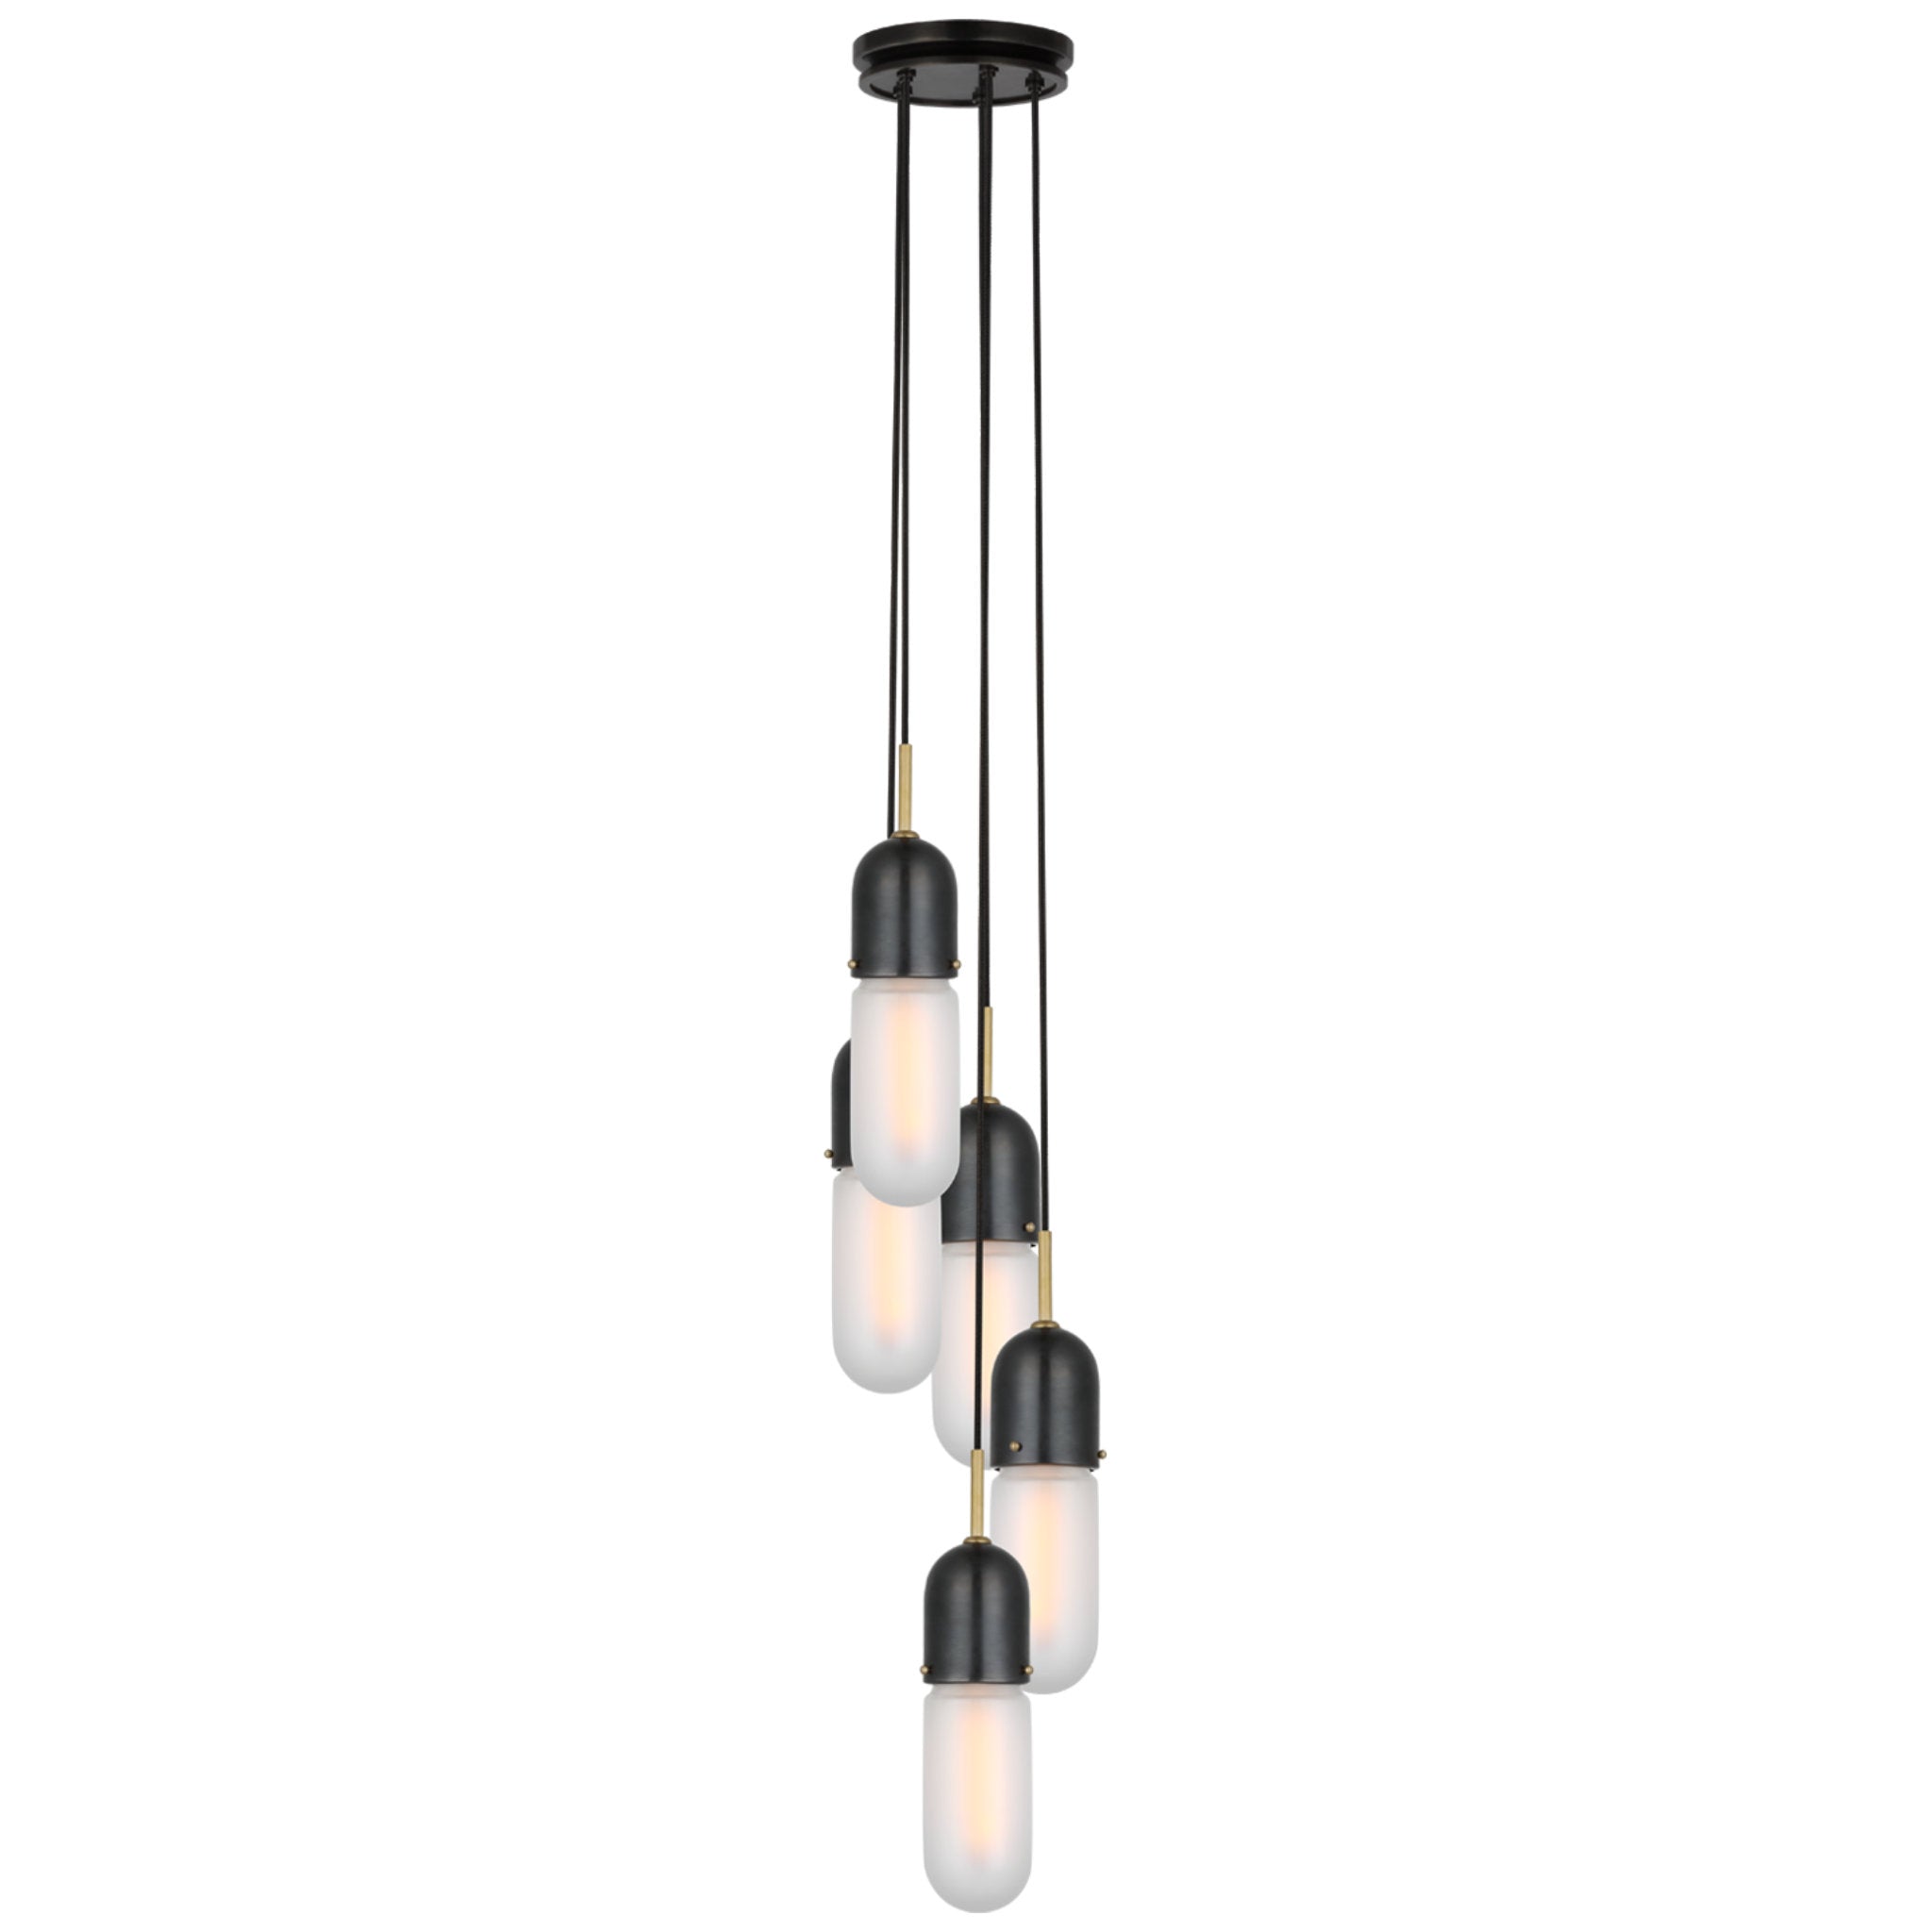 Thomas O'Brien Junio 5-Light Chandelier in Bronze and Brass with Frosted Glass